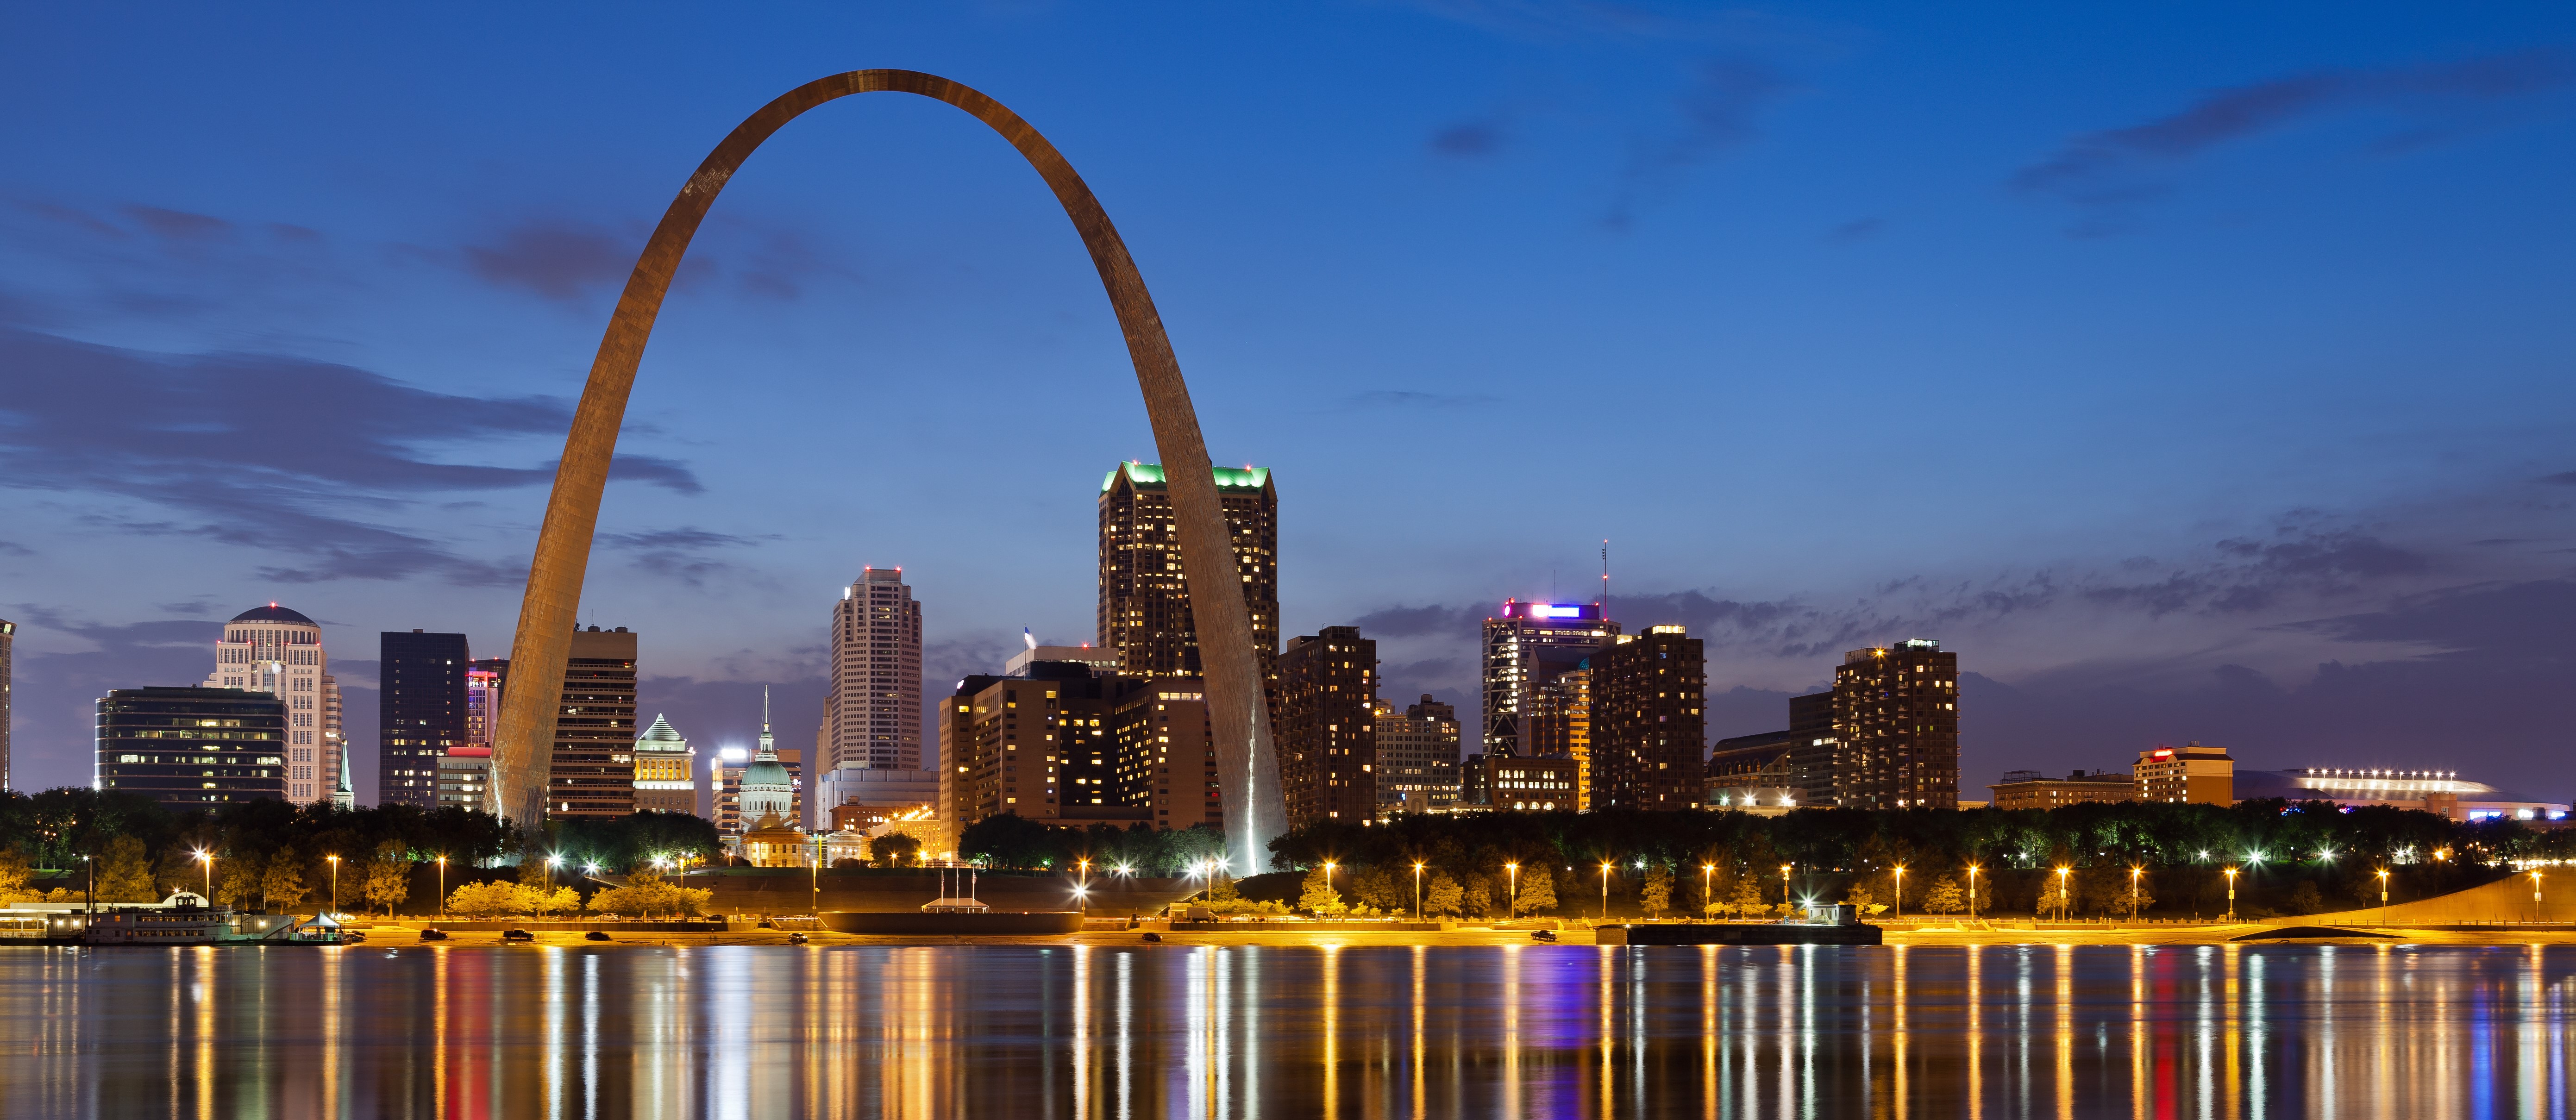 bigstock-City-of-St-Louis-skyline--32931914 - sized for Muse